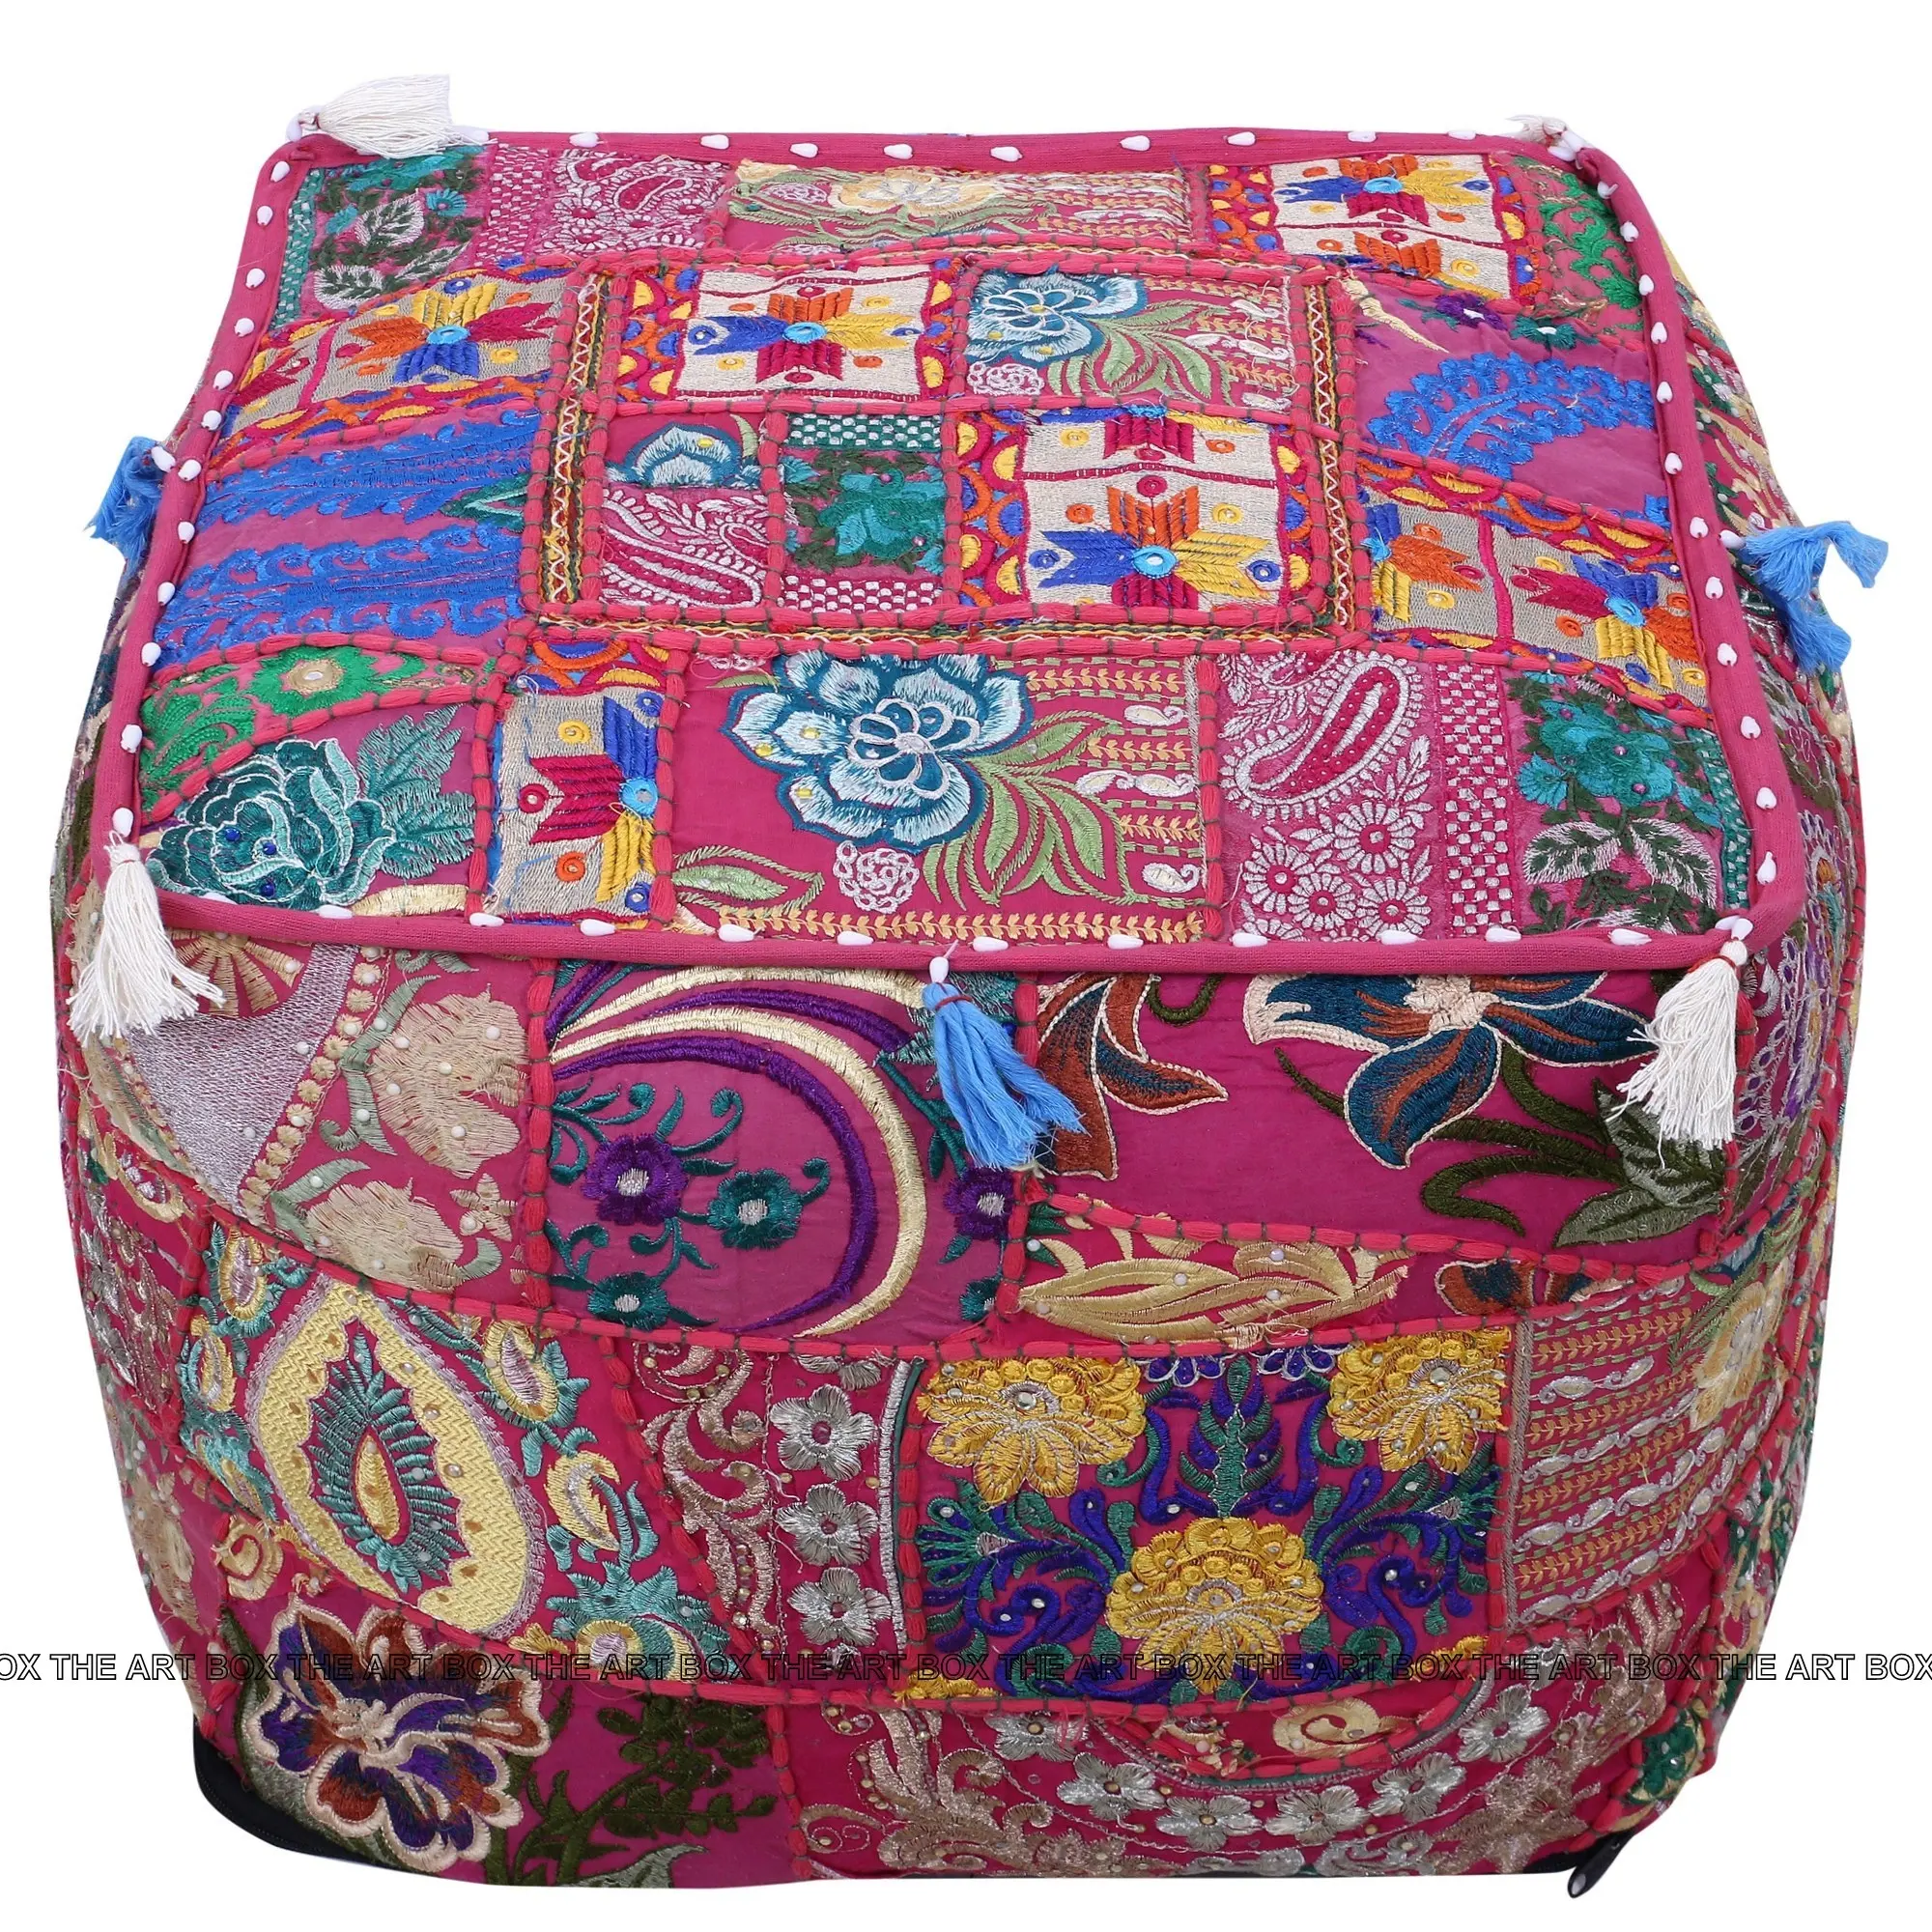 Moroccan Pouf Wholesale Foot Stool Cover Indian Bohemian Square Pouf Storage Ottoman Patchwork Living Room Furniture Traditional